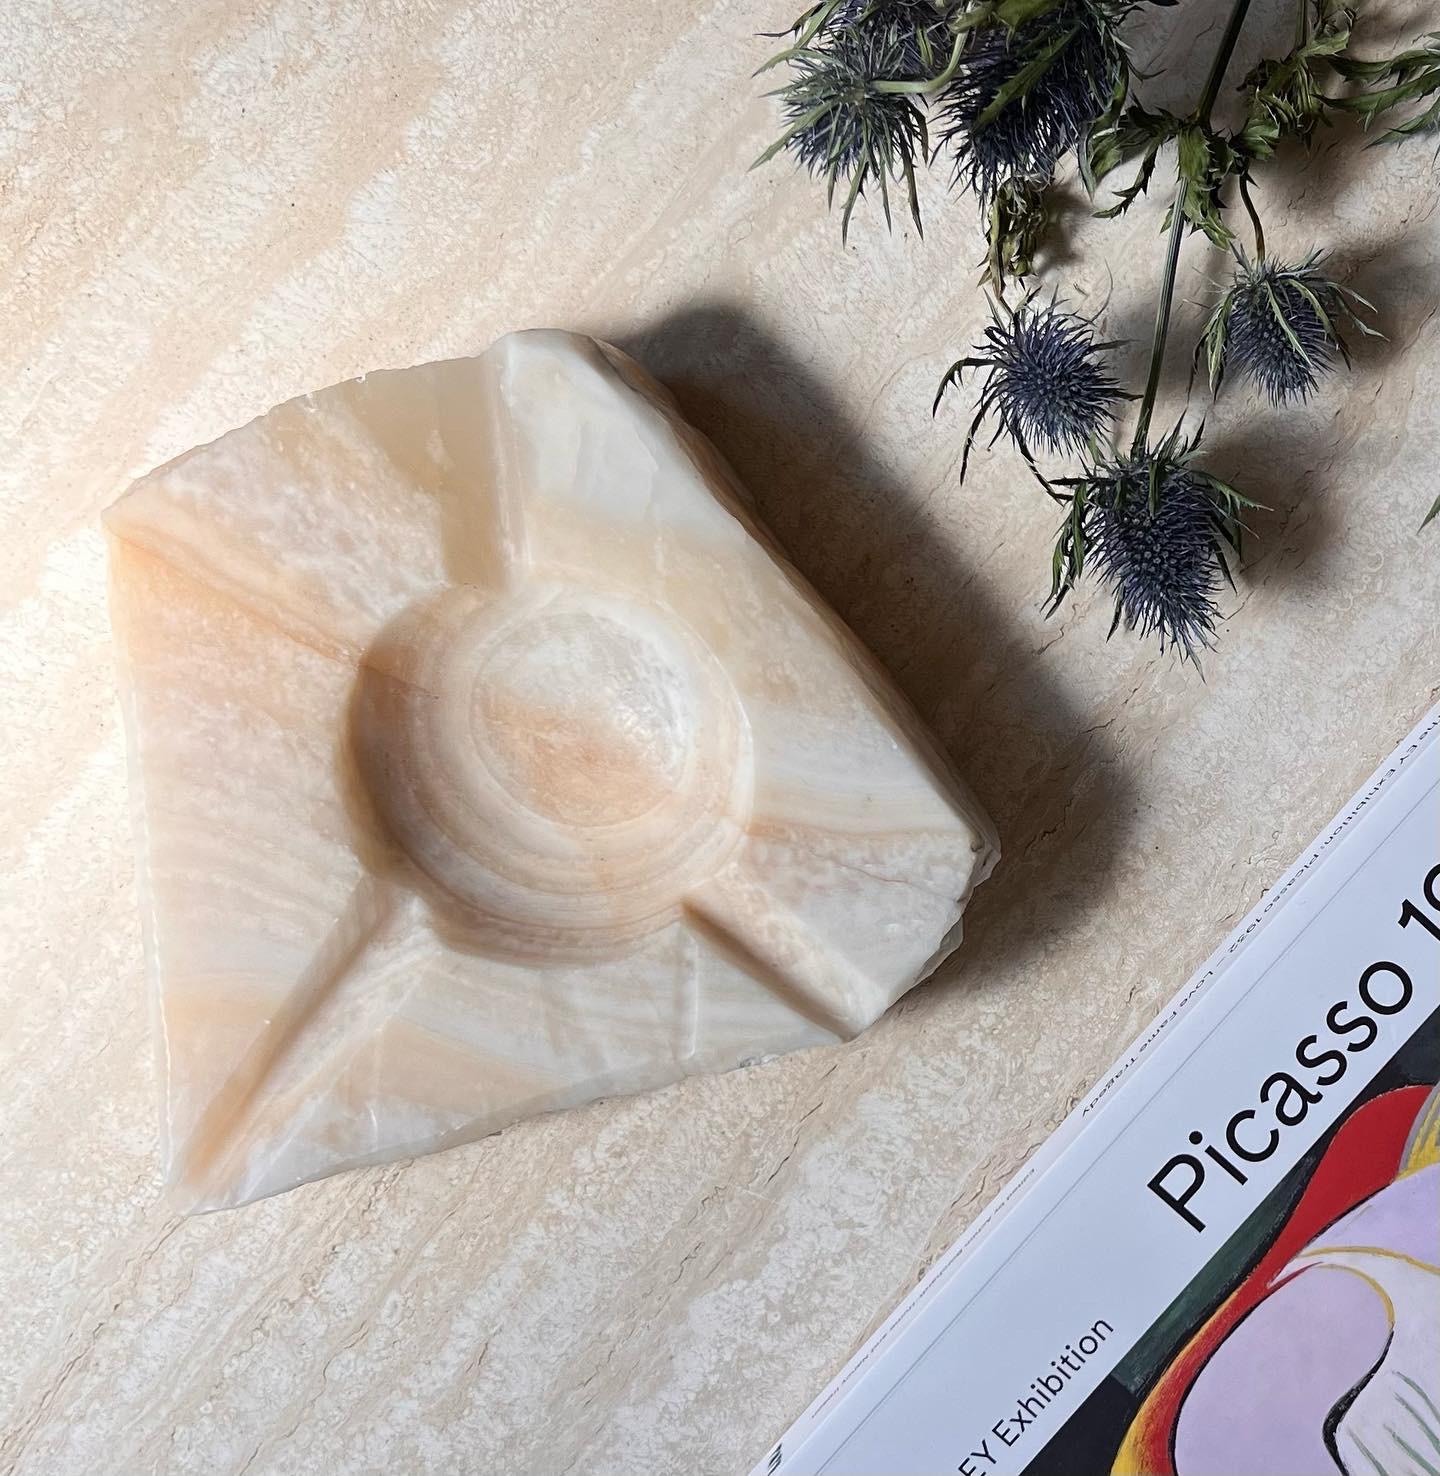 A monumental vintage Italian raw travertine slab ashtray, circa 1960s. hand carved and featuring three chunky rivulets. Tones of crème brûlée and pearl. Pick up in central west Los Angeles or worldwide shipping available.
Dimensions:
8” W x 7.5” D